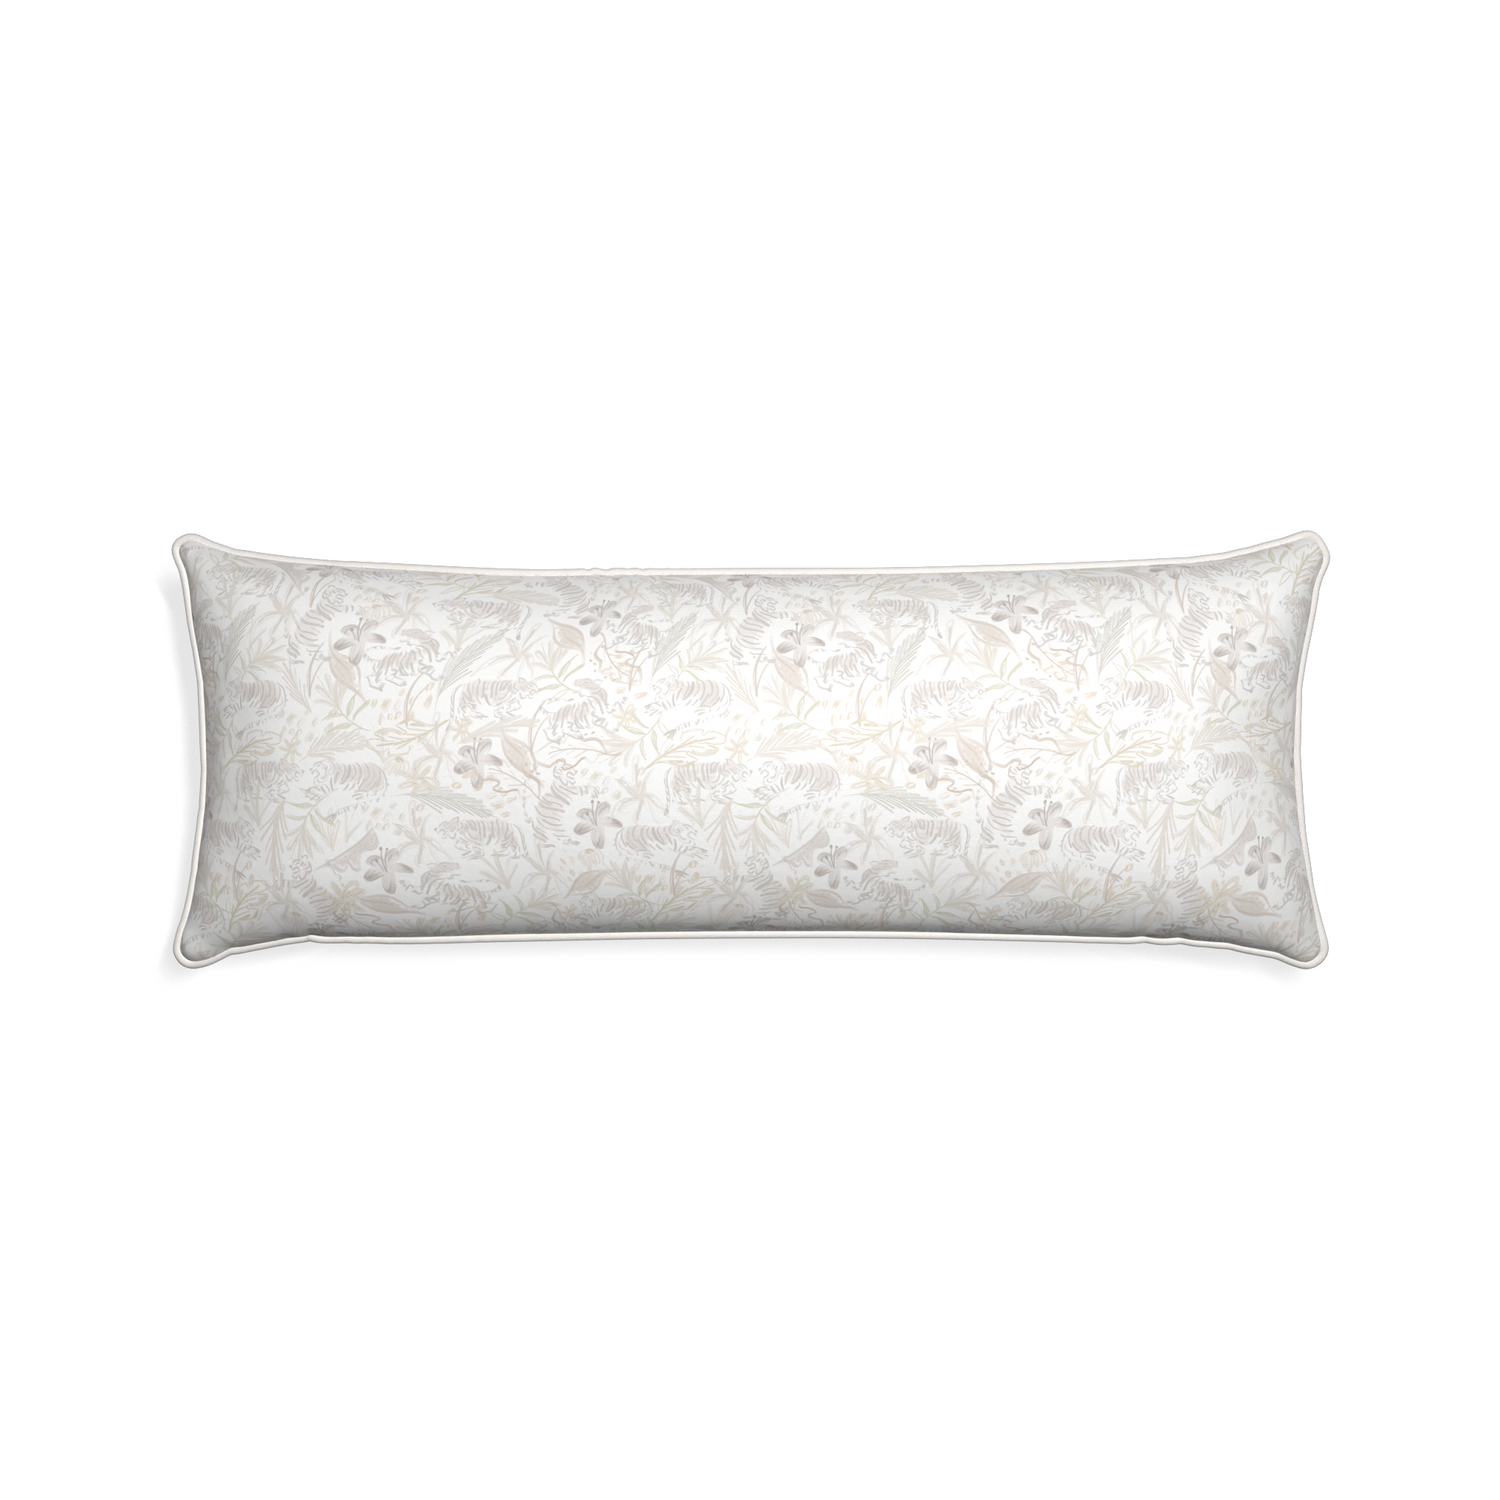 Xl-lumbar frida sand custom beige chinoiserie tigerpillow with snow piping on white background